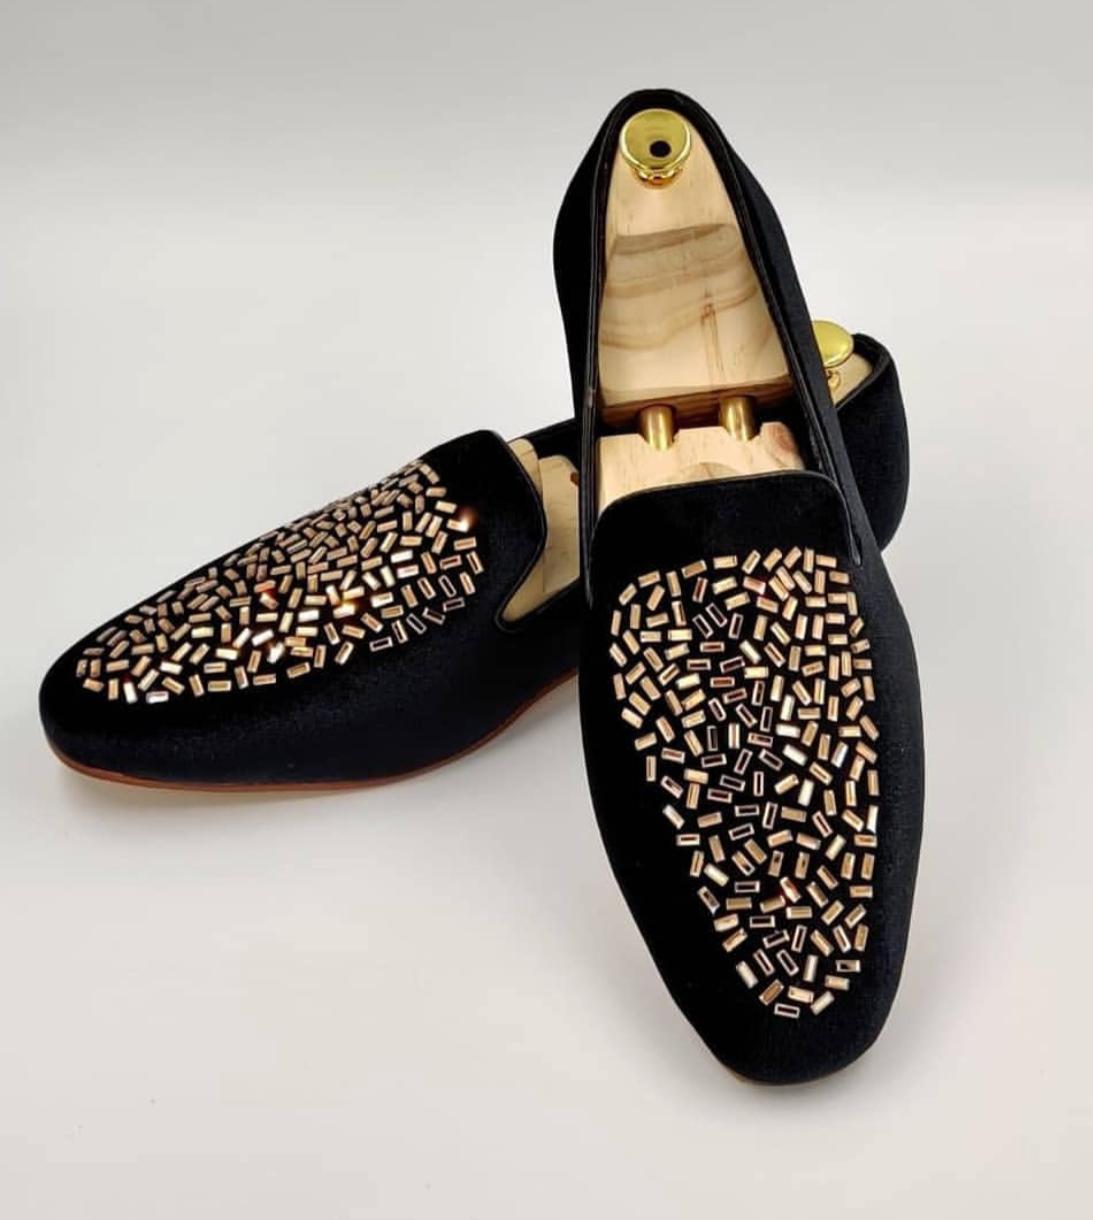 Buy Now Fashion Studded Suede Loafer Shoes For Partywear And Casualwear - JackMarc